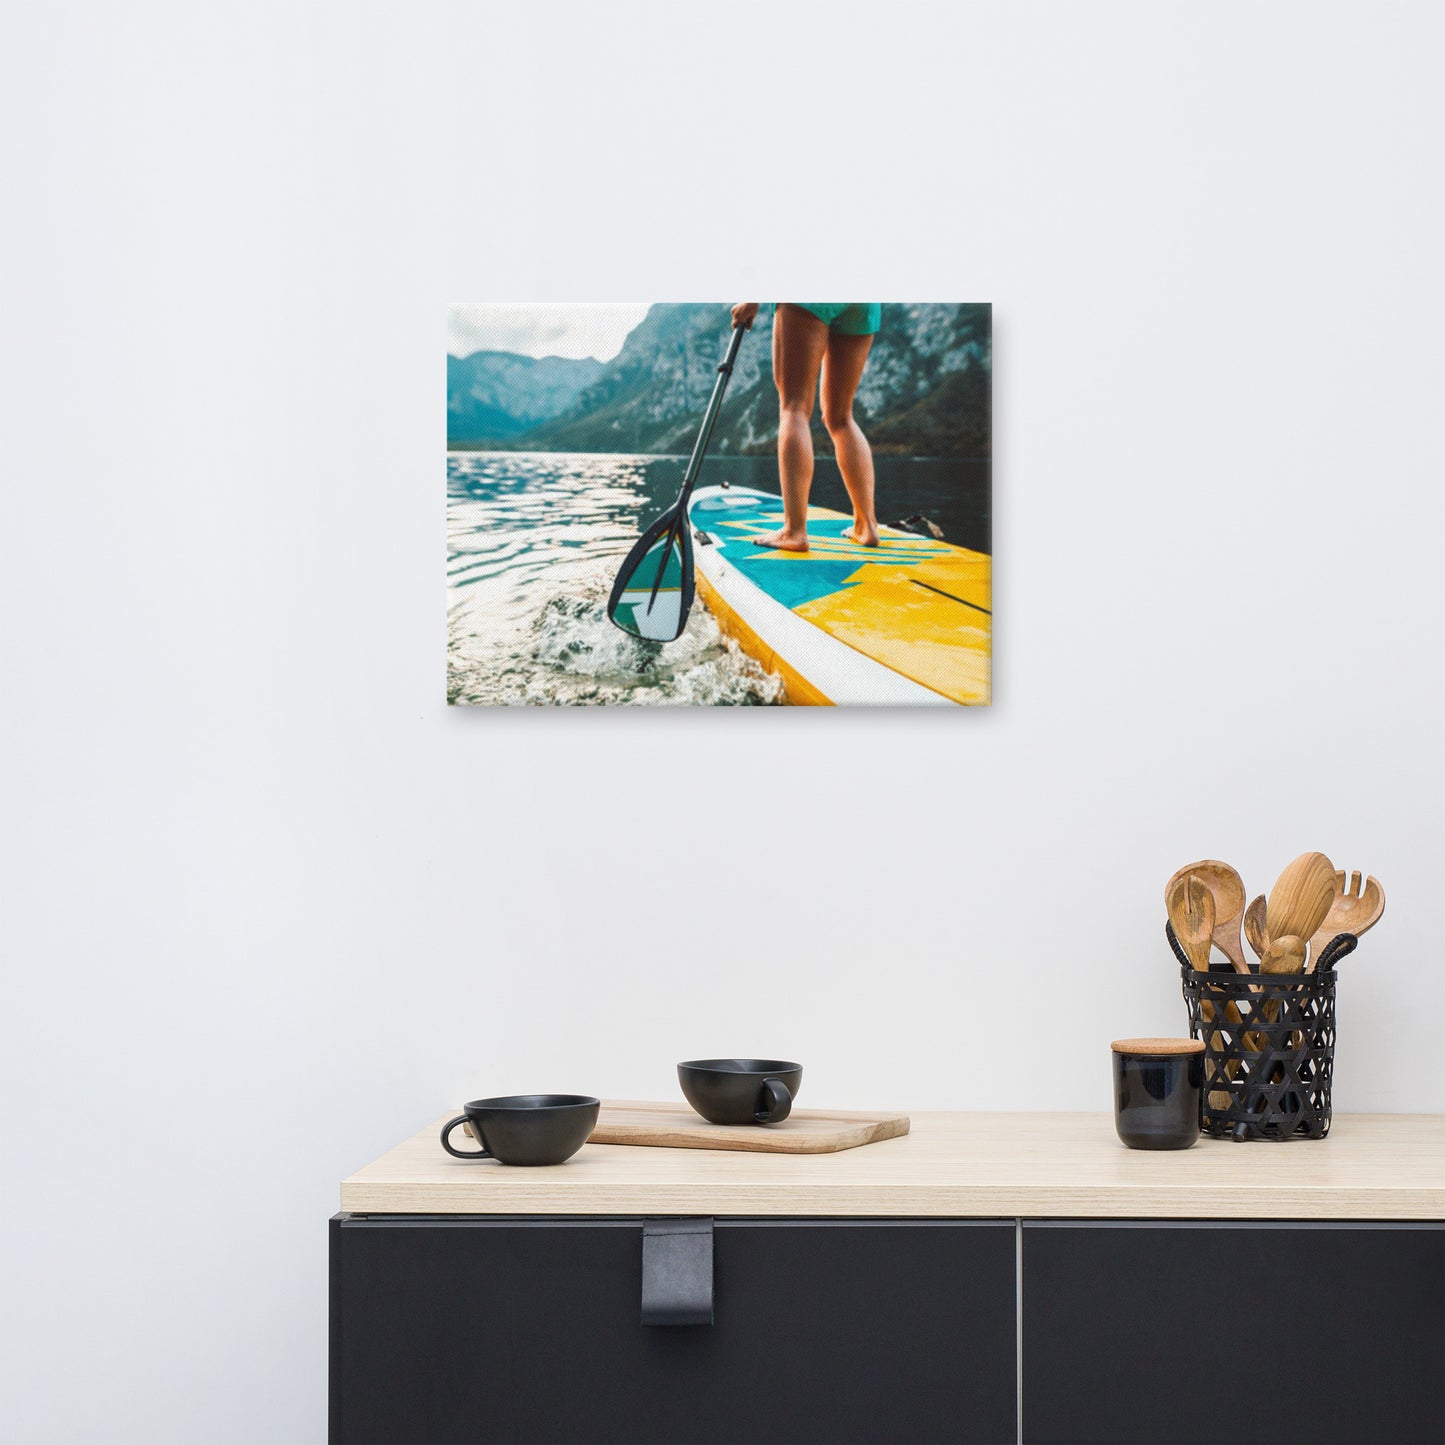 A Moment of Solitude Lifestyle Photograph Canvas Wall Art Print